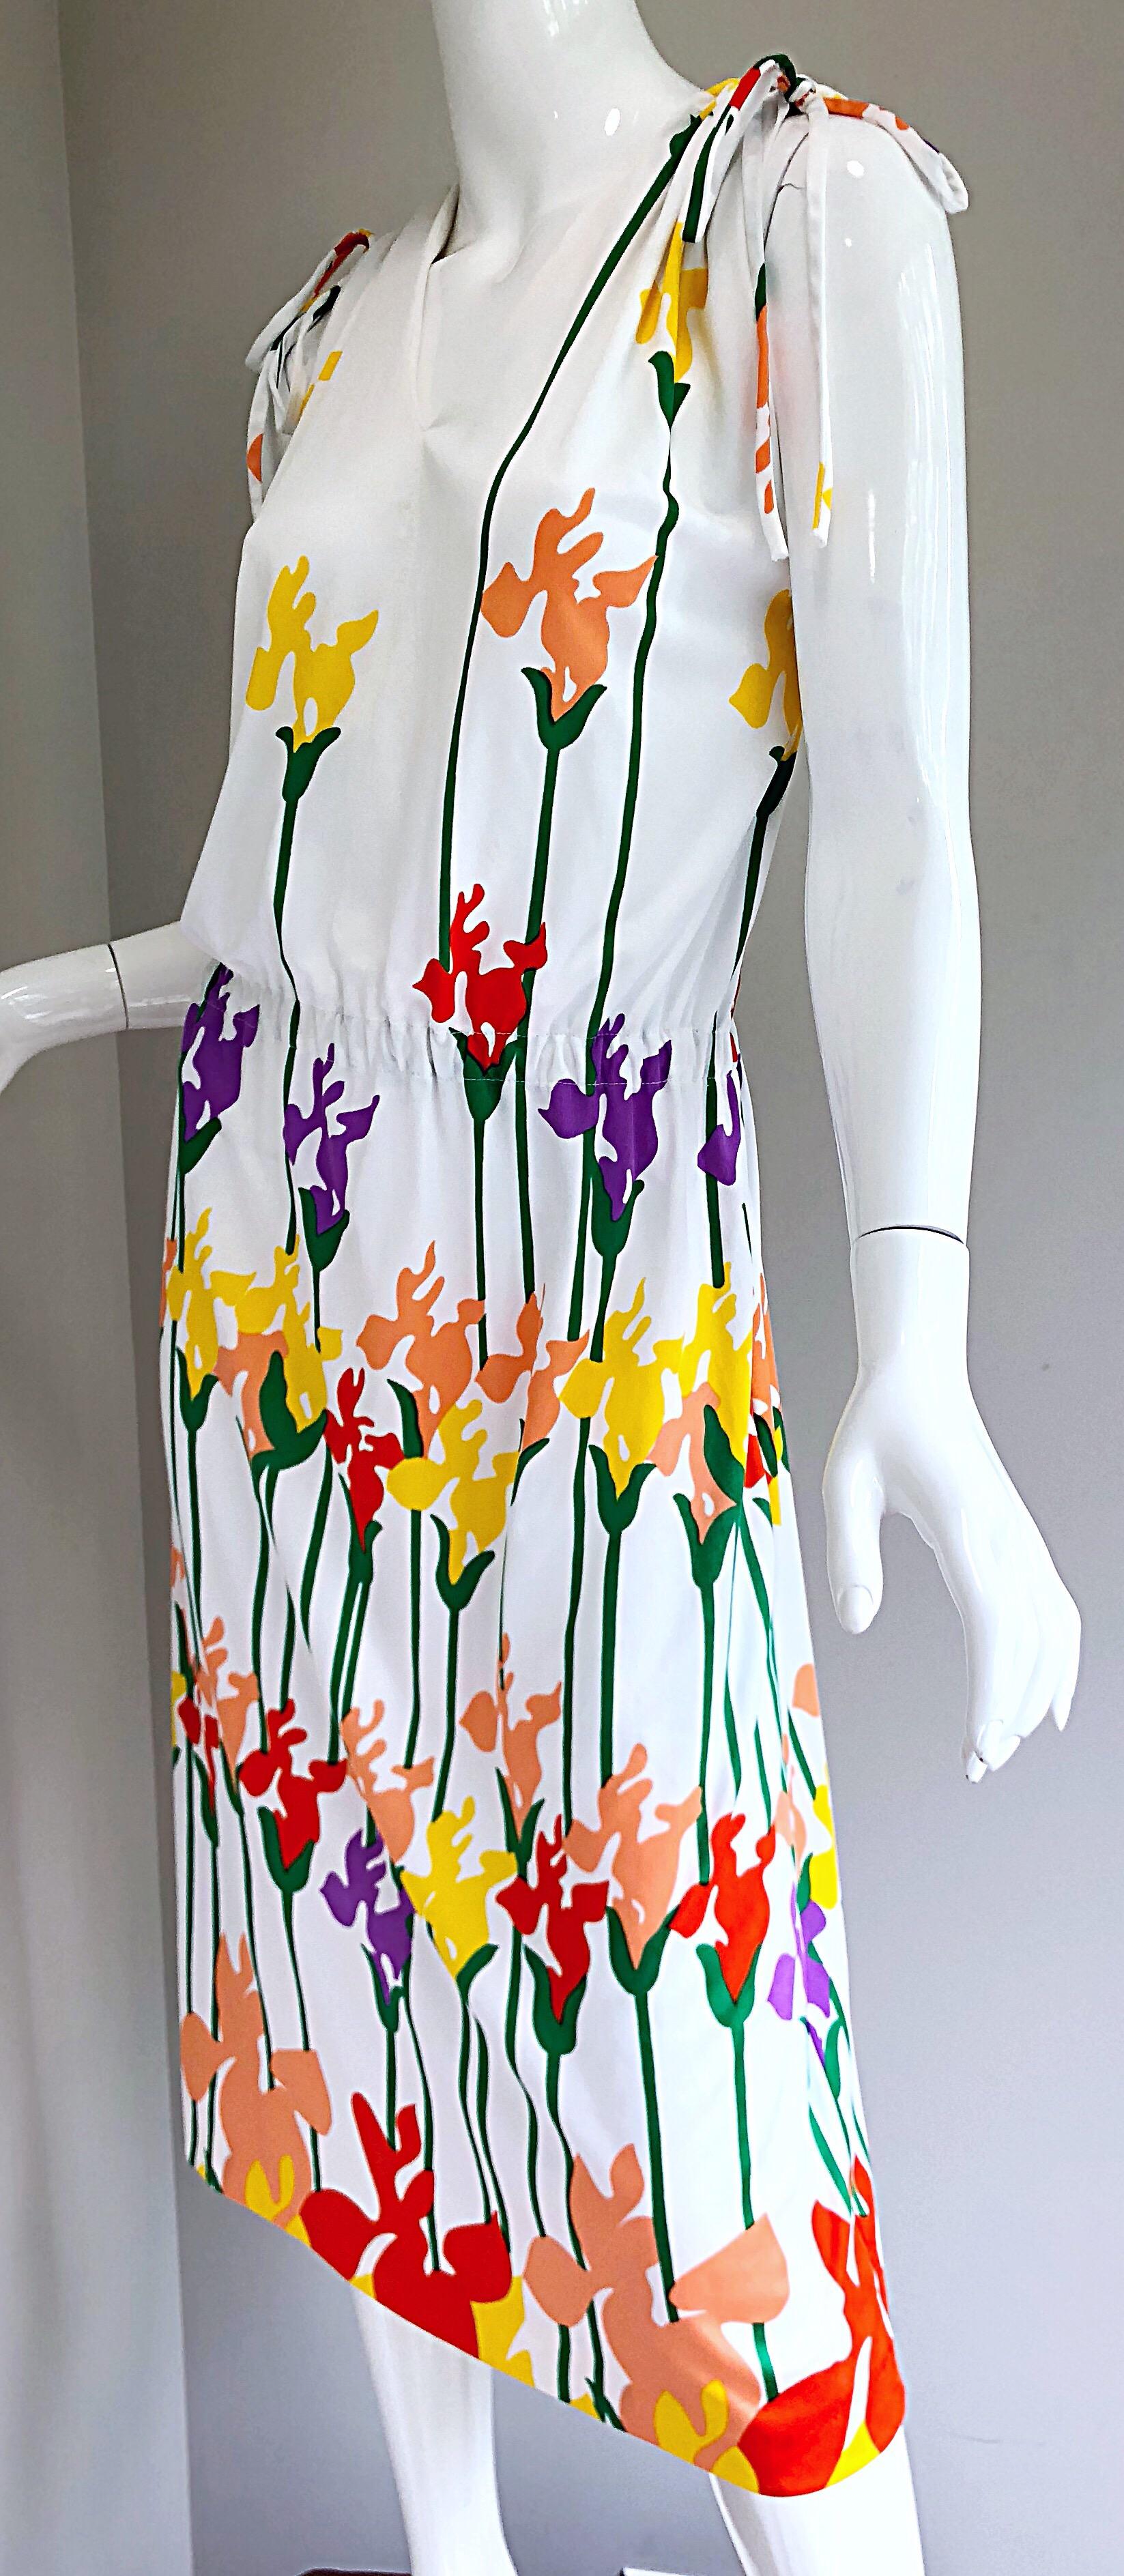 Lanvin Vintage 1970s Tulip Butterfly Print Colorful 70s Jersey Drawstring Dress For Sale 7